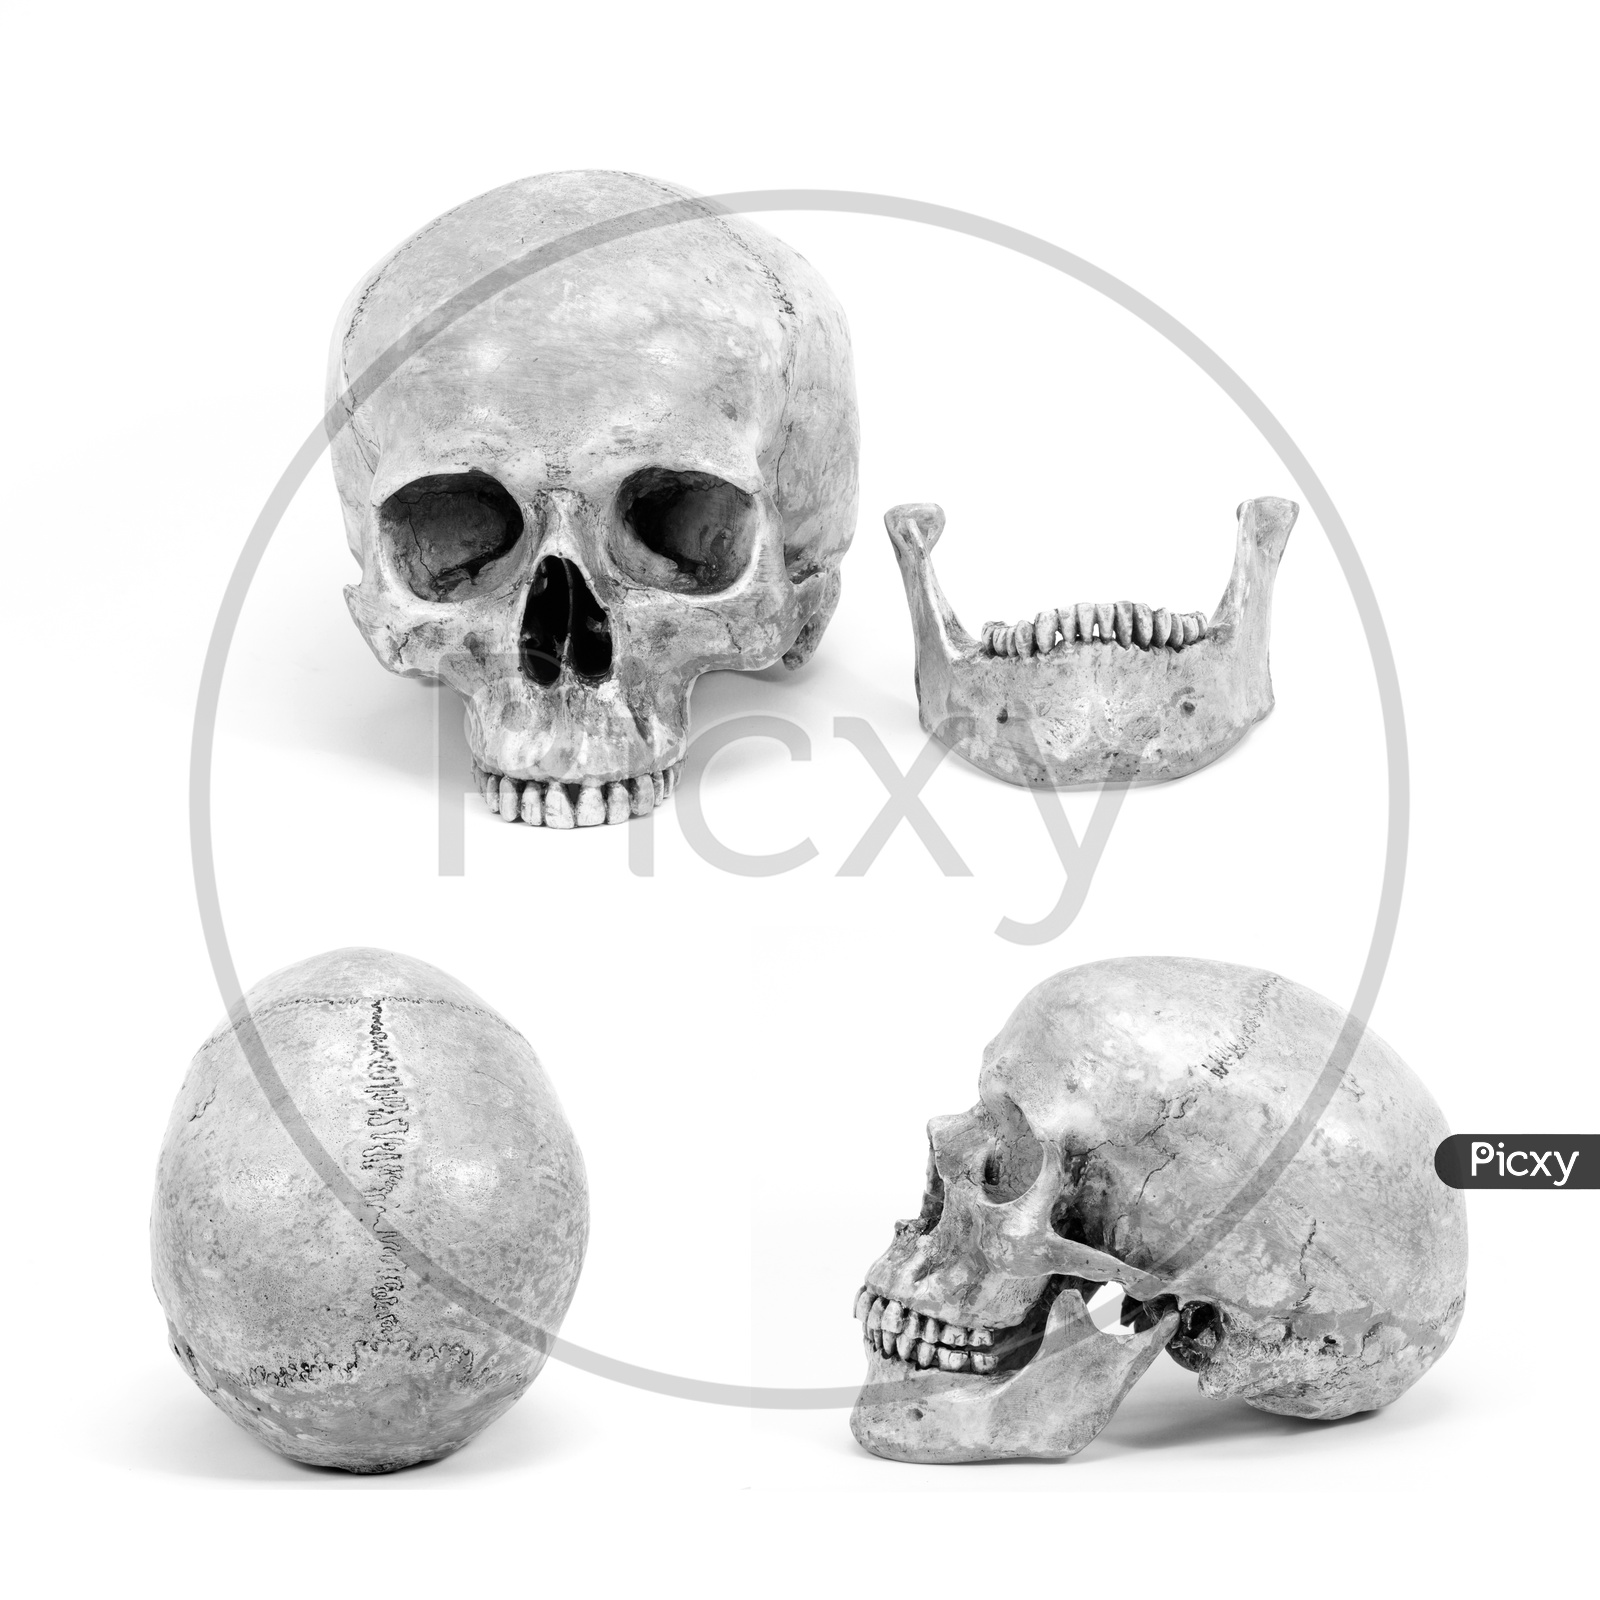 Human skull image isolate on white background for use in communication about Halloween.